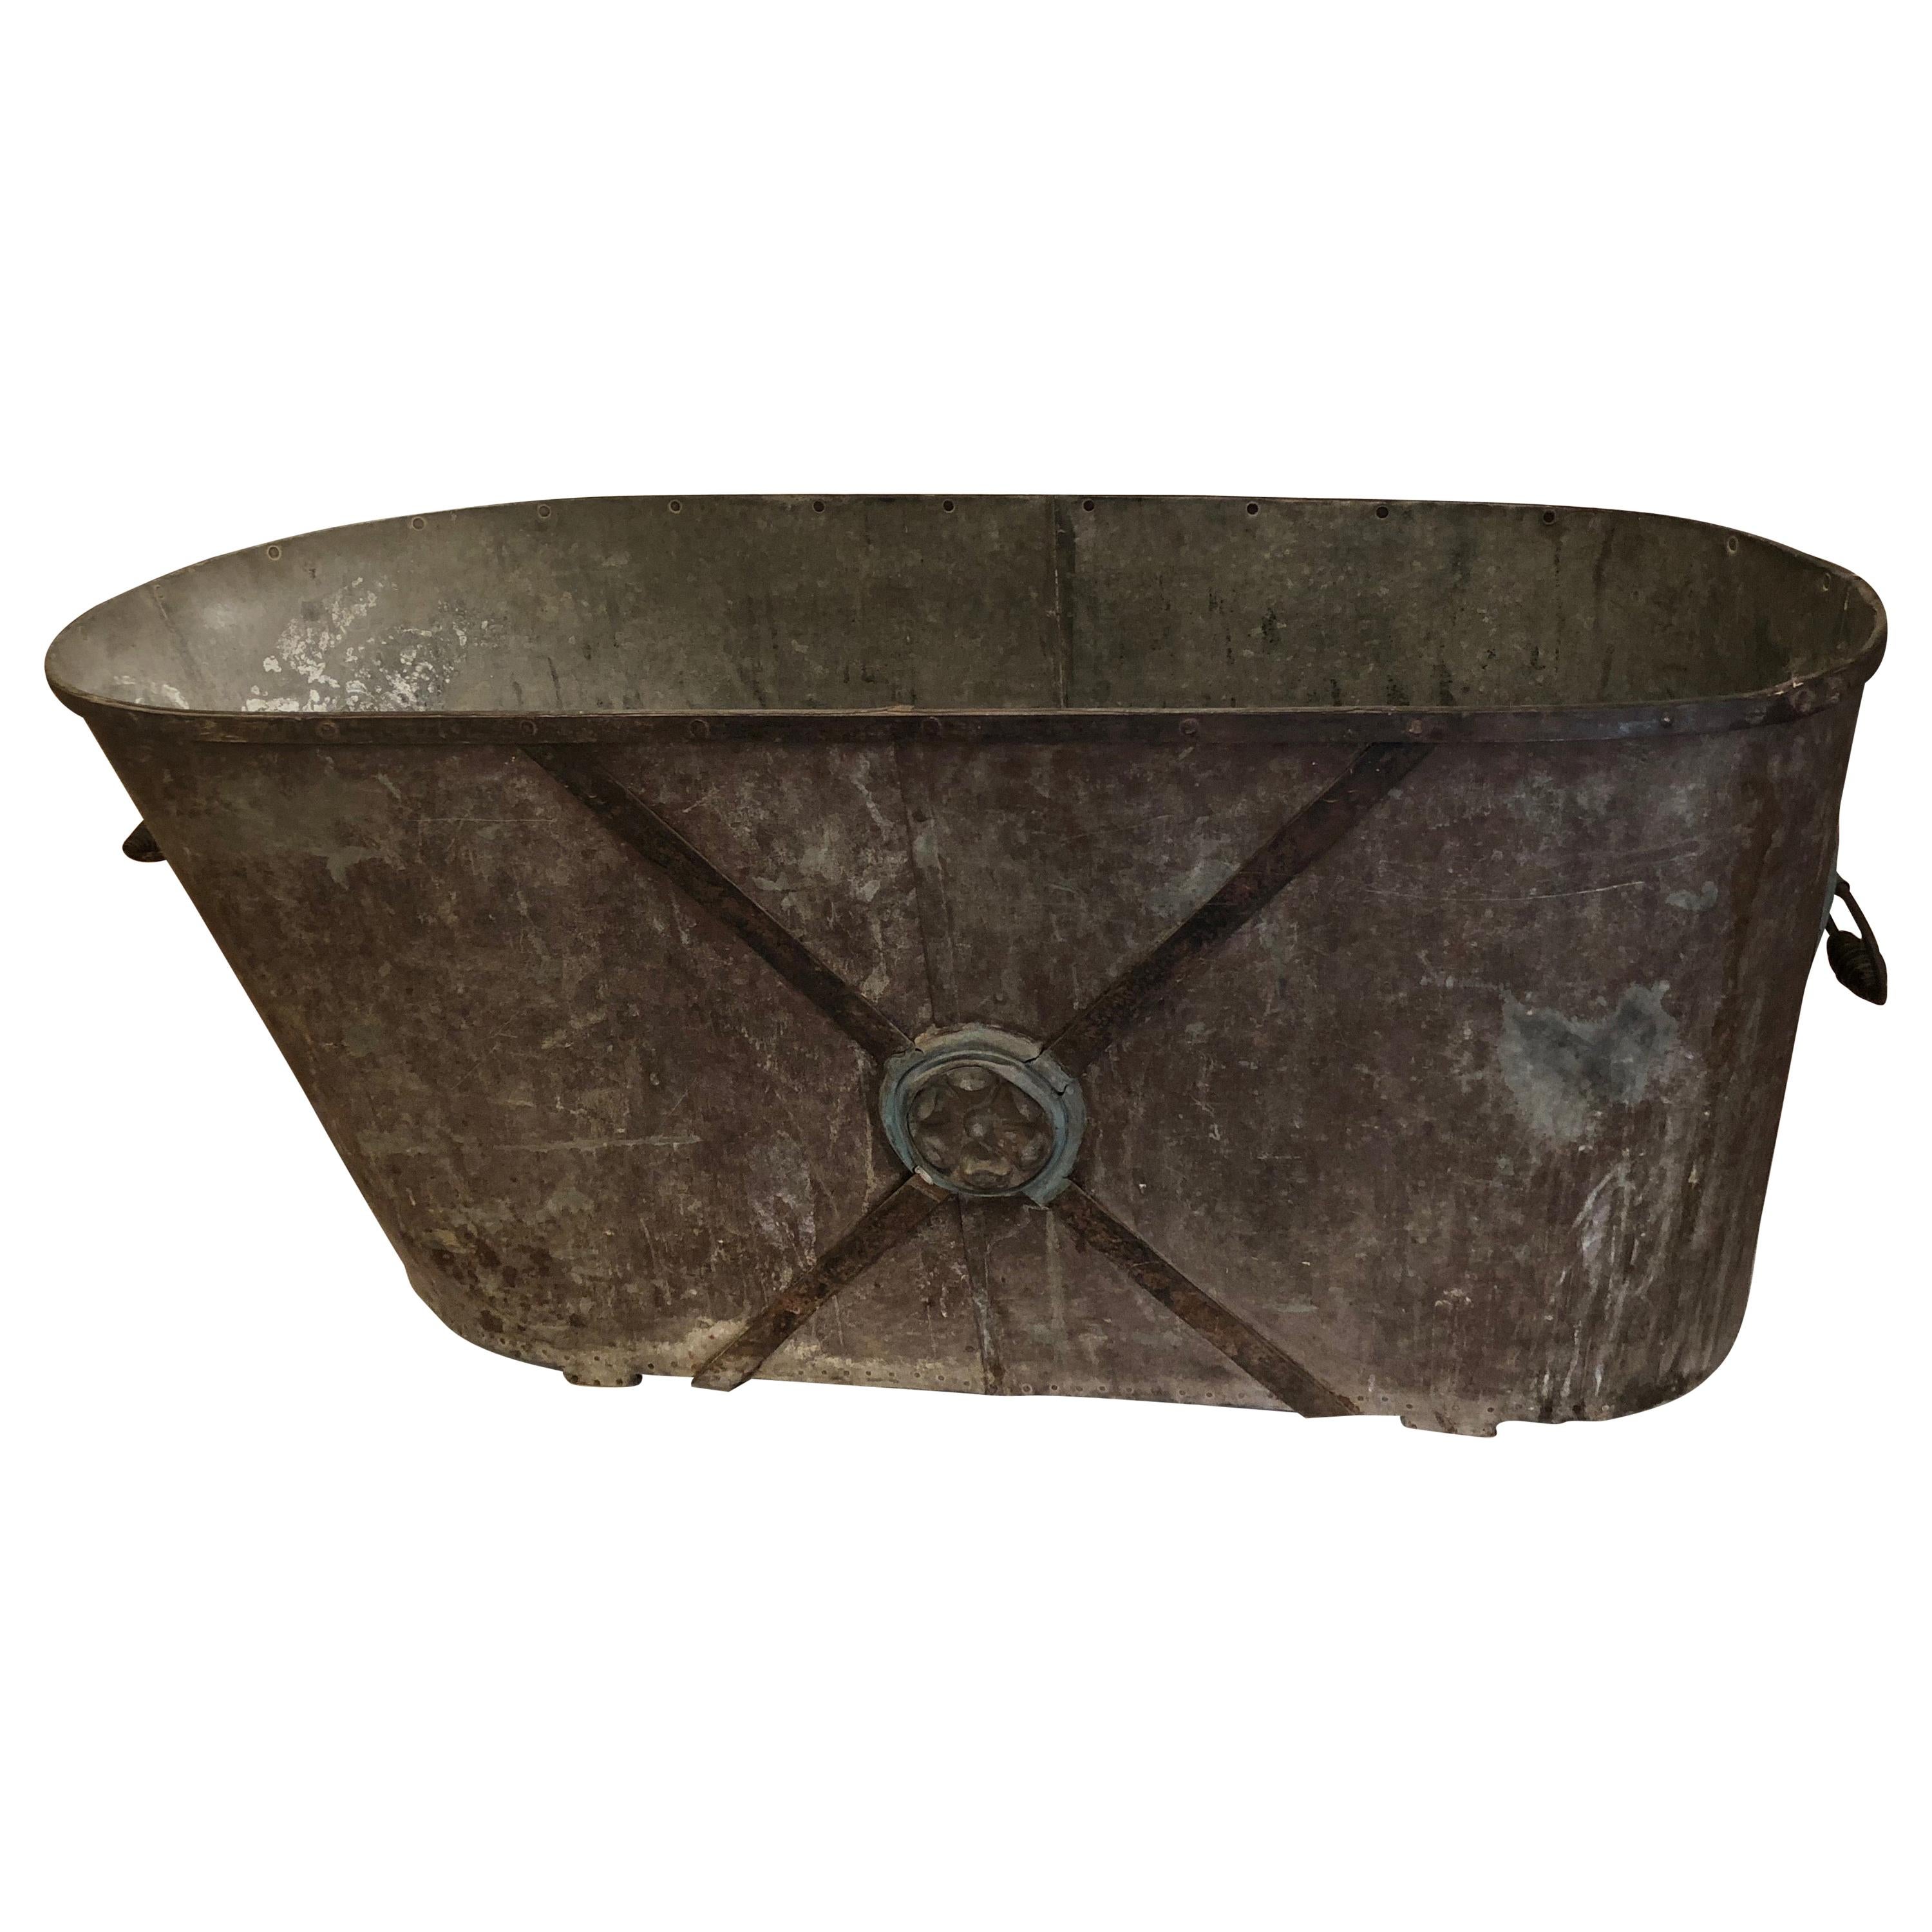 French Painted Zinc Bathtub from 1800